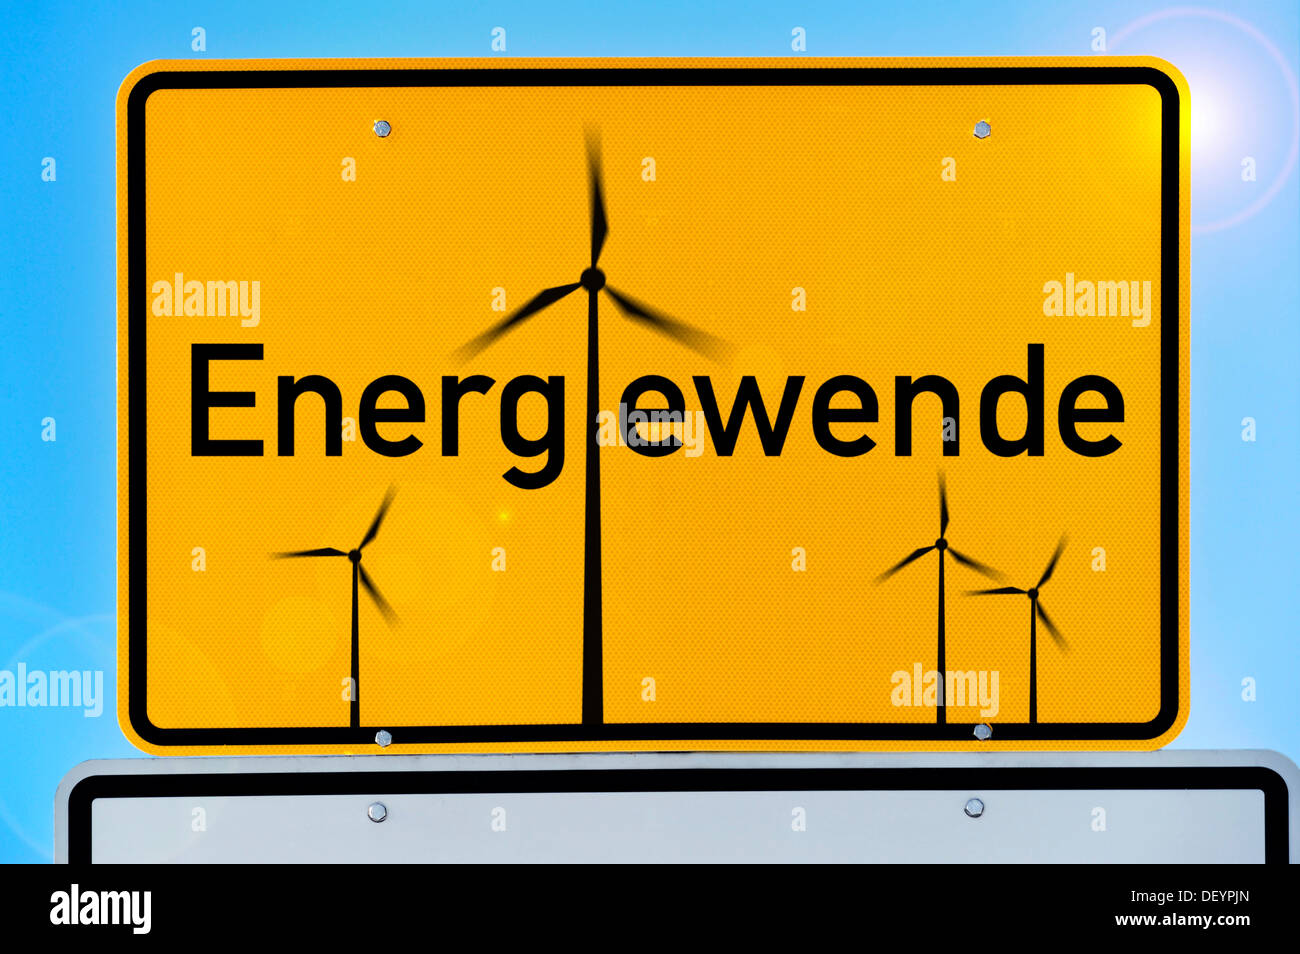 City limits sign with the word Energiewende or energy transition, symbolic image Stock Photo